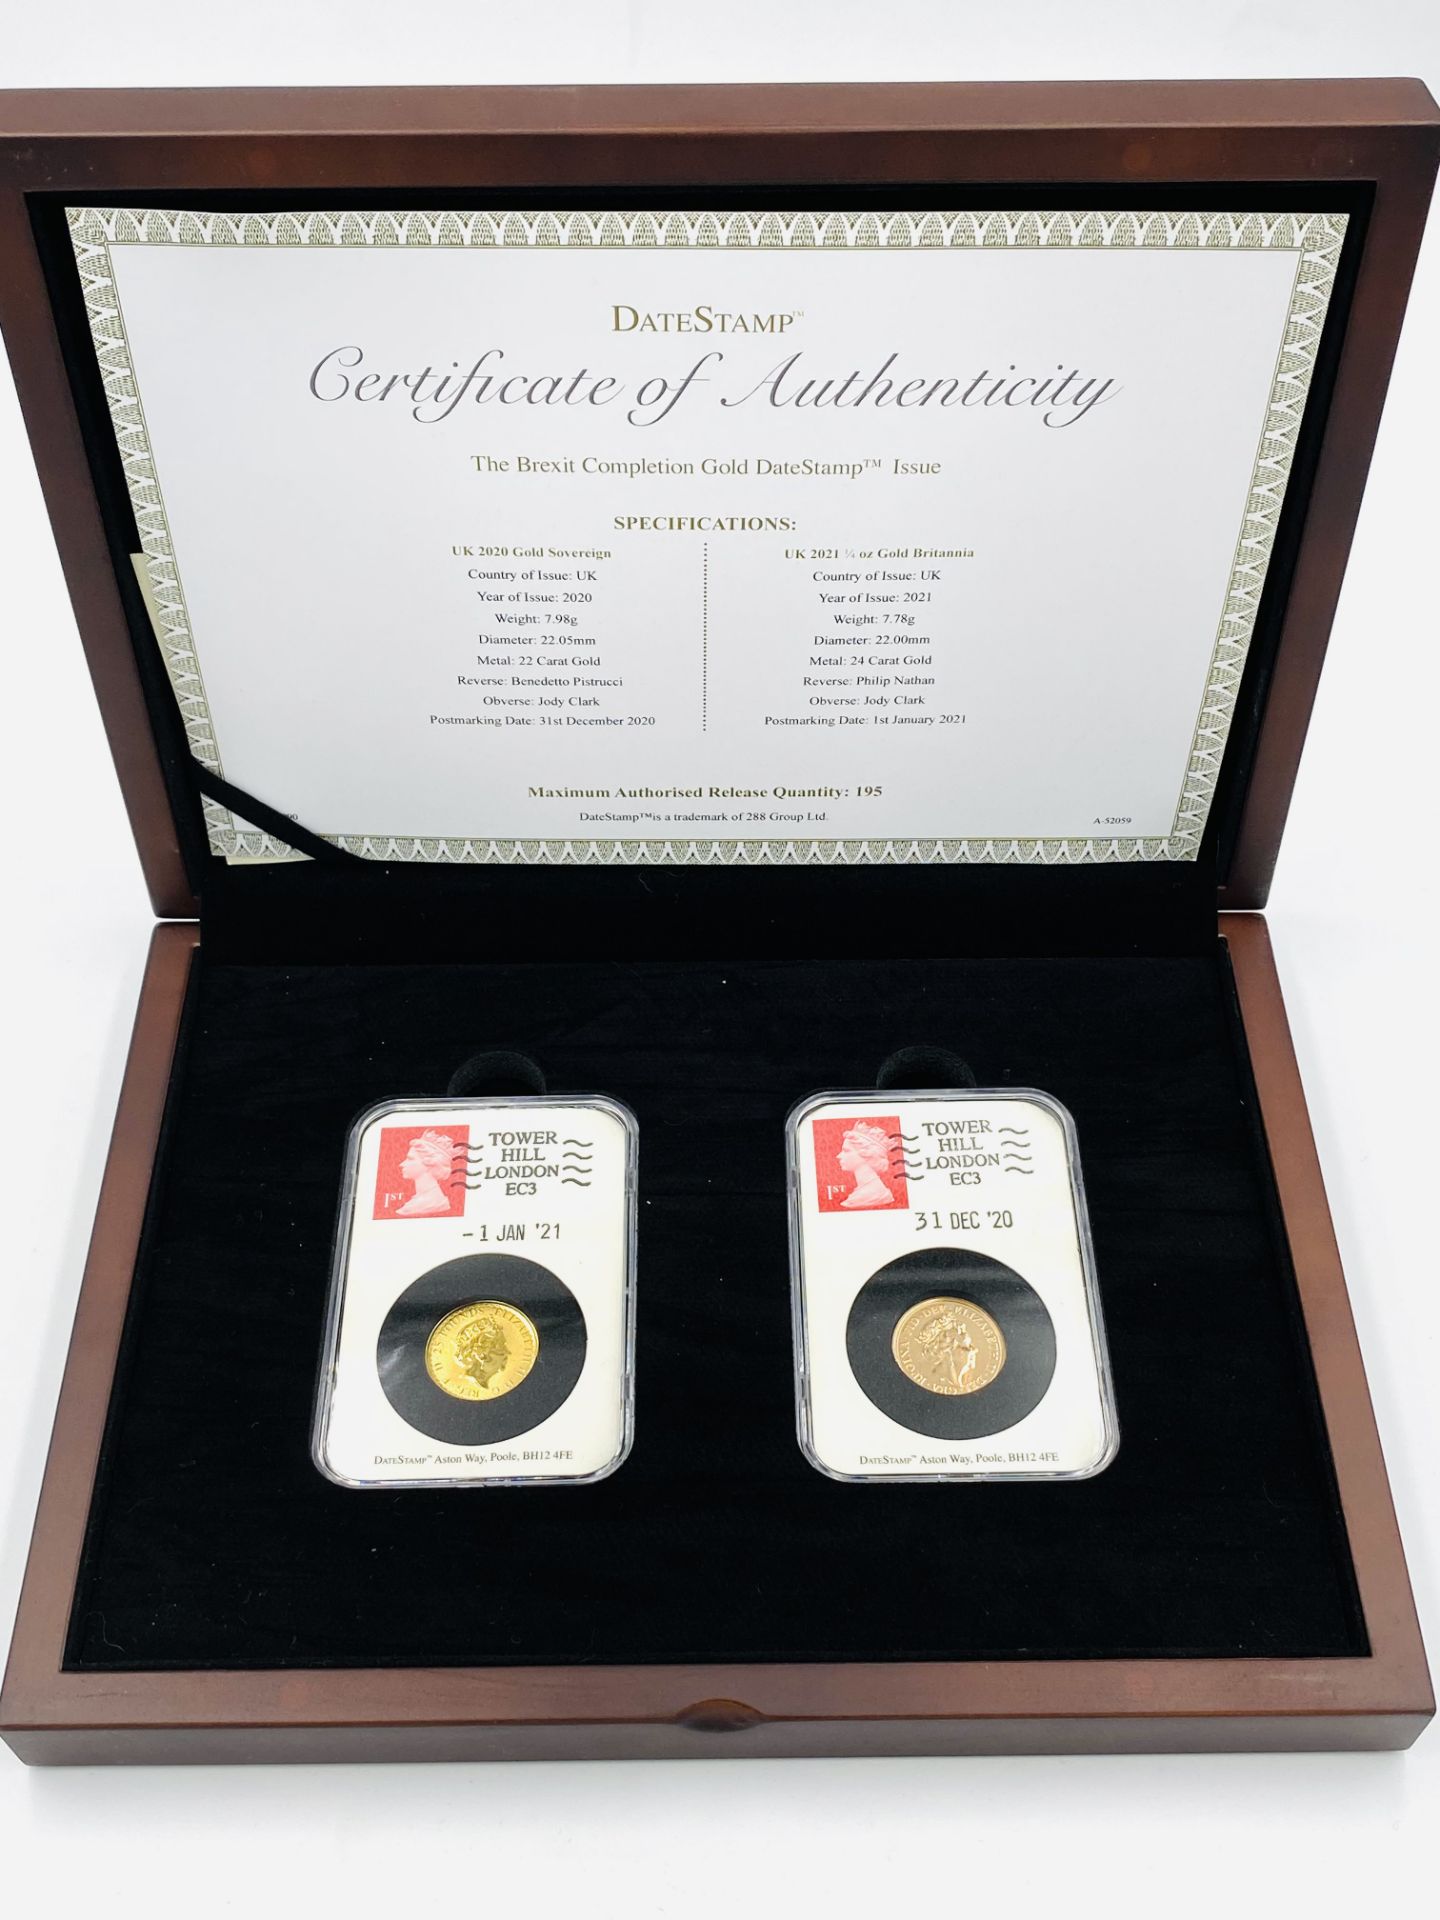 DateStamp Brexit Completion Issue, comprising 2020 gold sovereign and 2021 gold Britannia